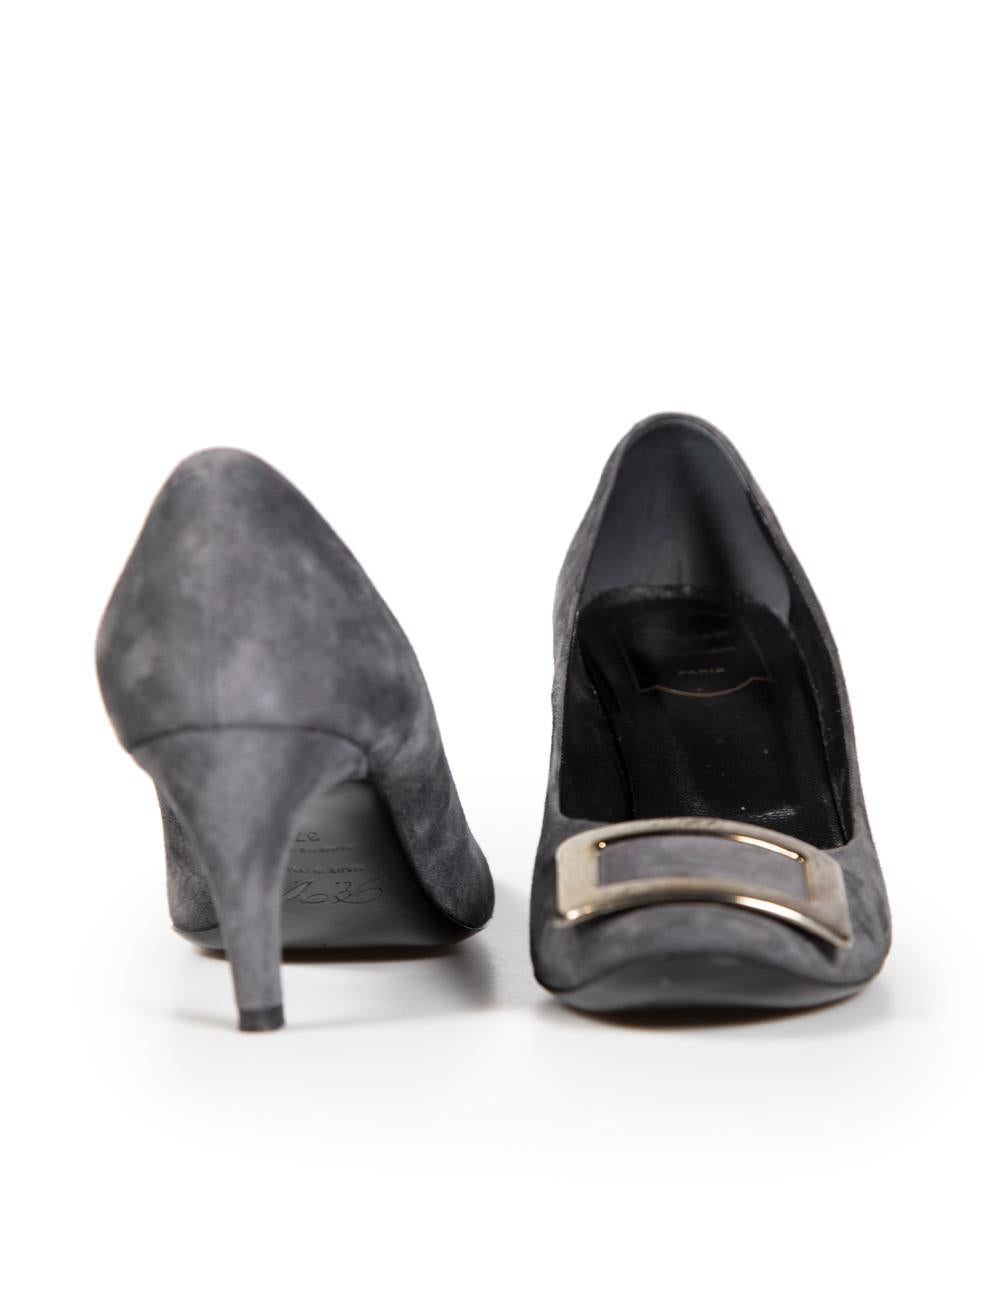 Roger Vivier Grey Suede Belle Buckle Accent Pumps Size IT 37 In Good Condition For Sale In London, GB